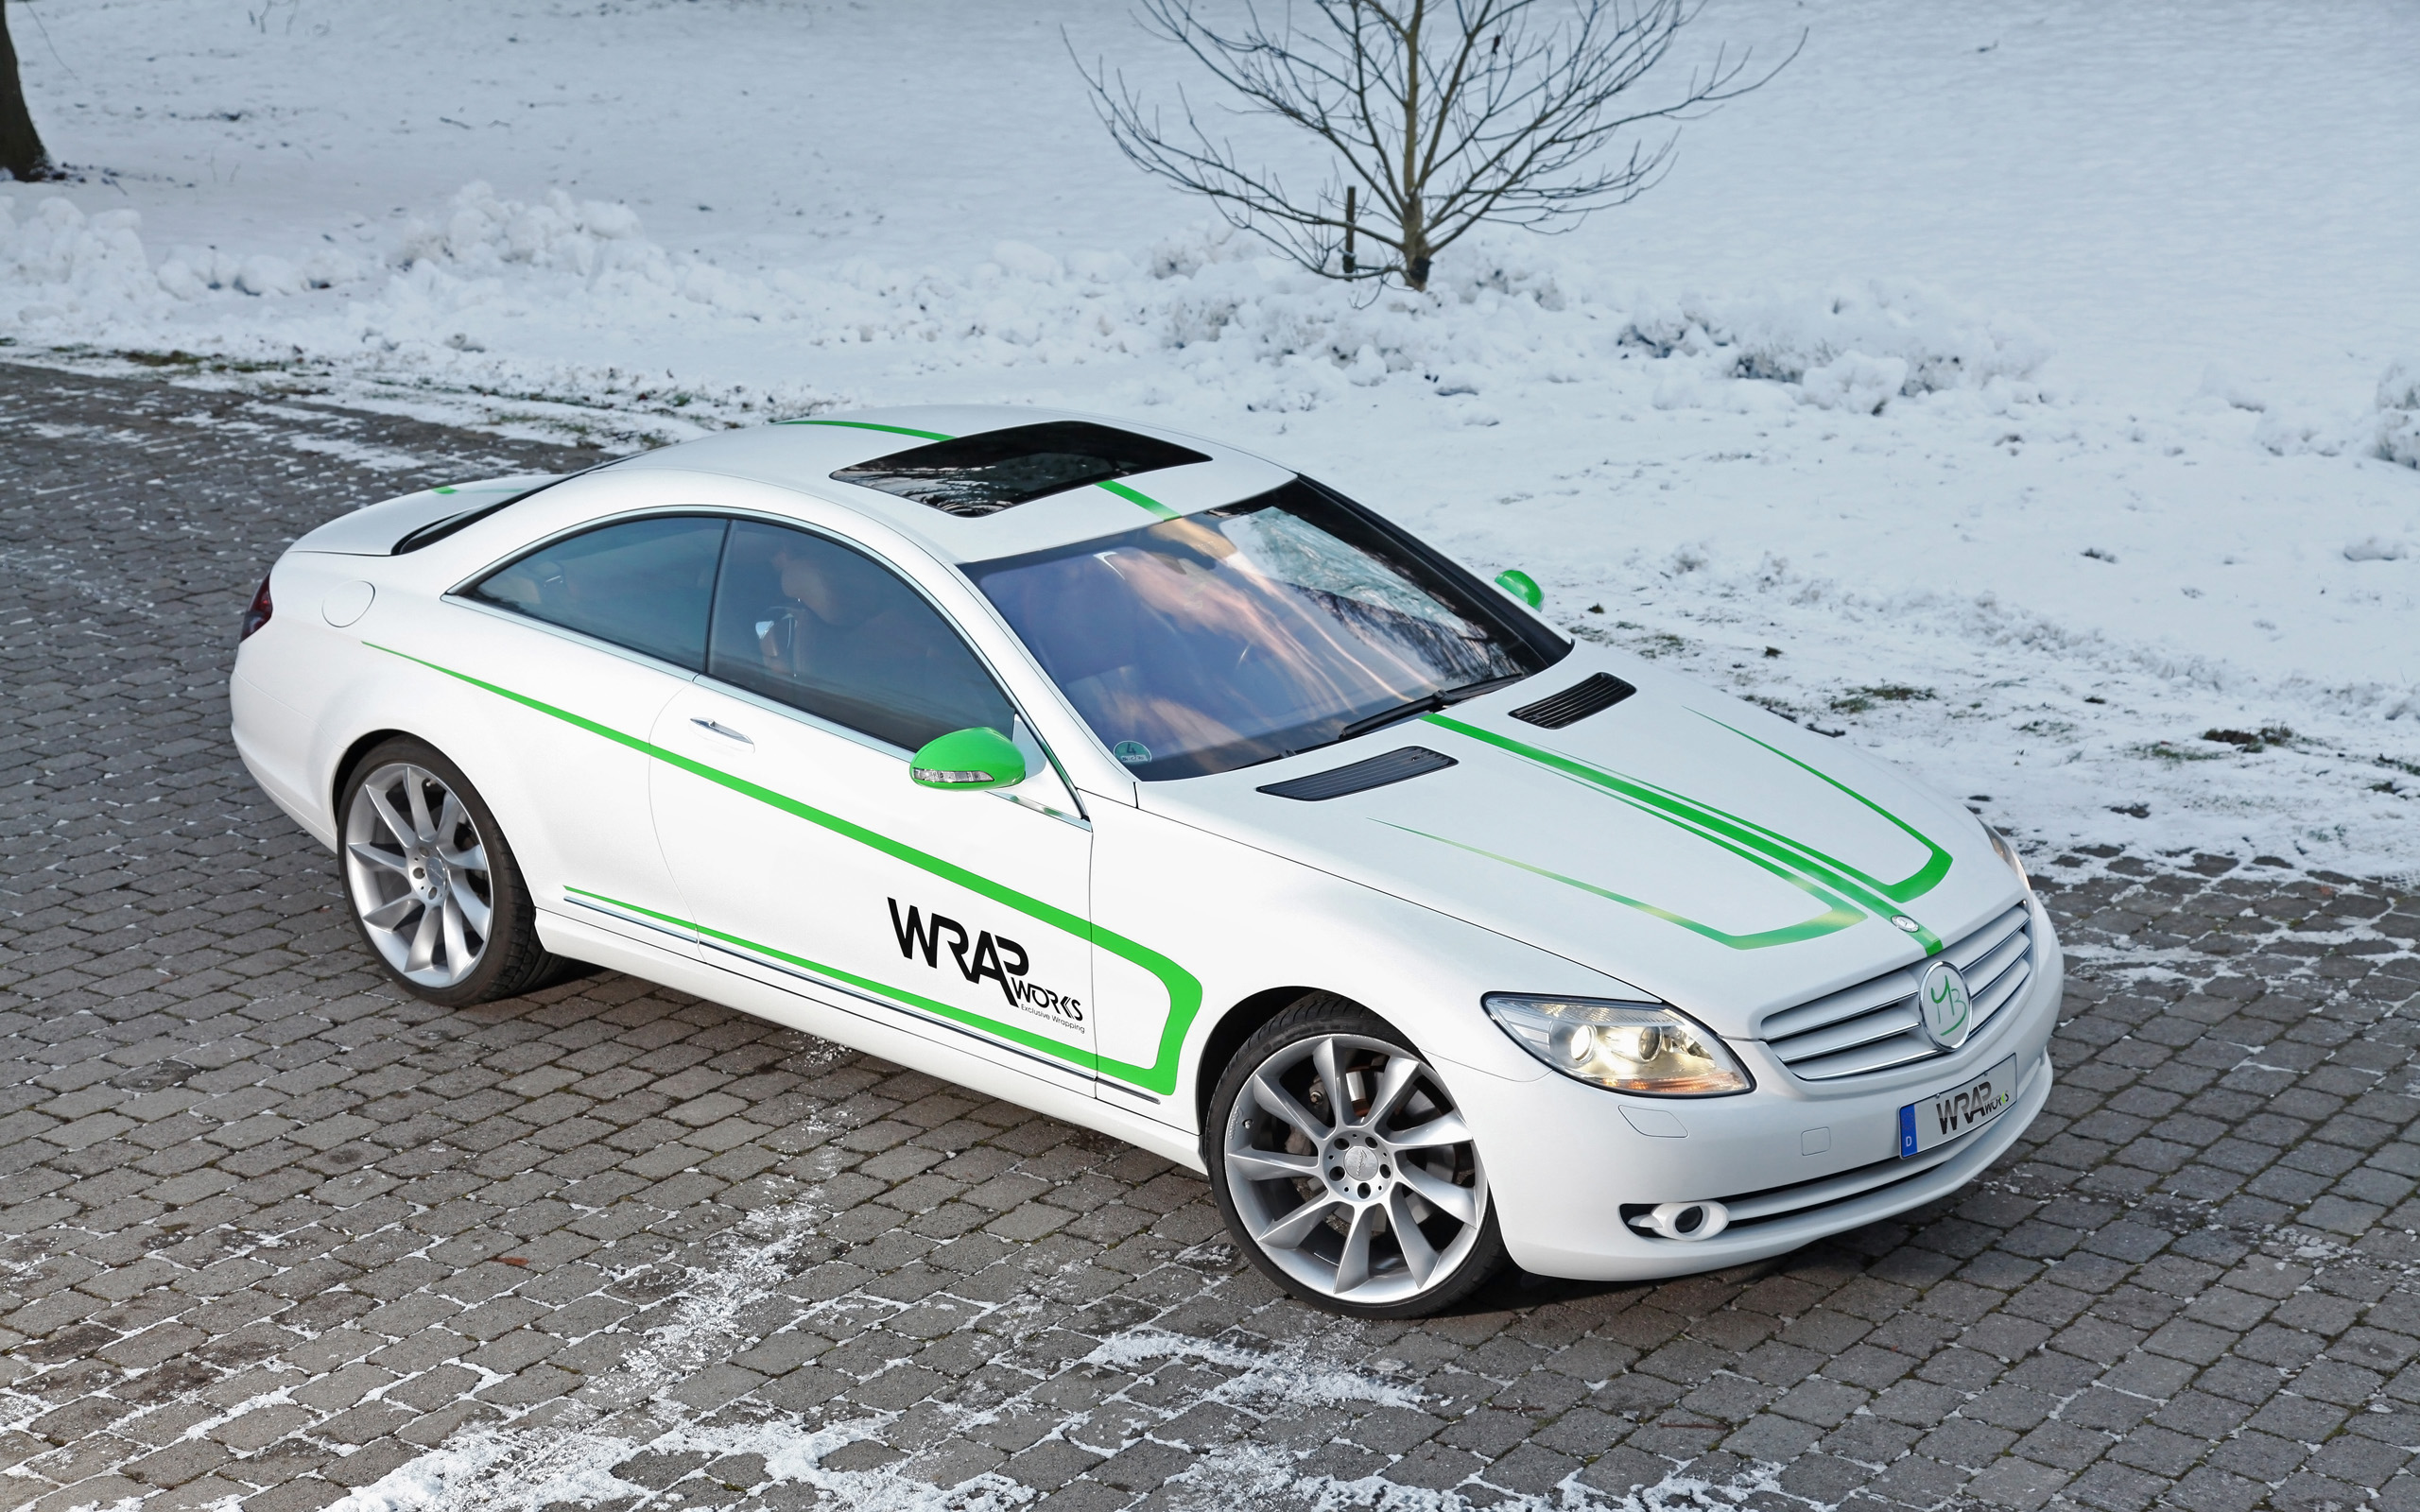 2007, Wrapworks, Mercedes, Benz, Cl 500, Tuning, Hg Wallpaper